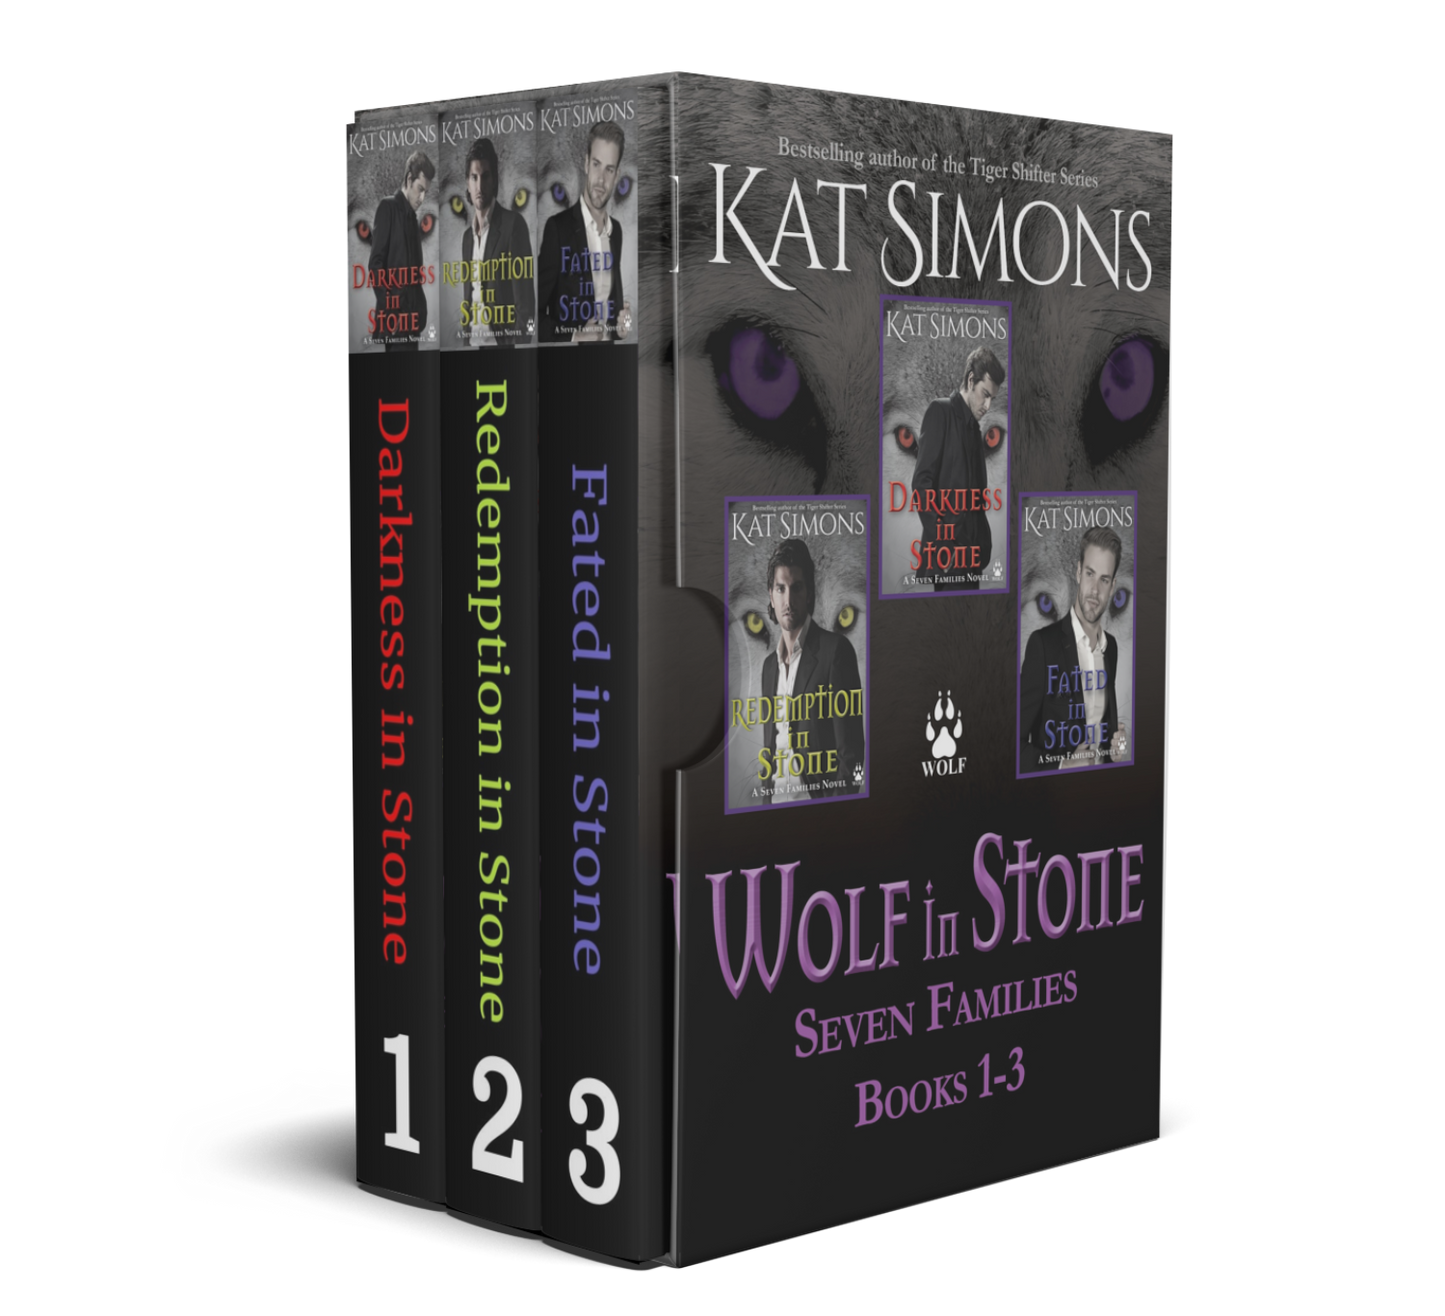 3D Box Set image for 3 books--this is eBooks only, with front cover of Wolf in Stone on front of "box" and title of three included books to the left on "spines". WOLF IN STONE title in purple at bottom of front of box, three images of front cover for books in middle of cover, Author name and title at top. Image of a wolf with purple eyes in the background. Wolf paw print in center of cover.